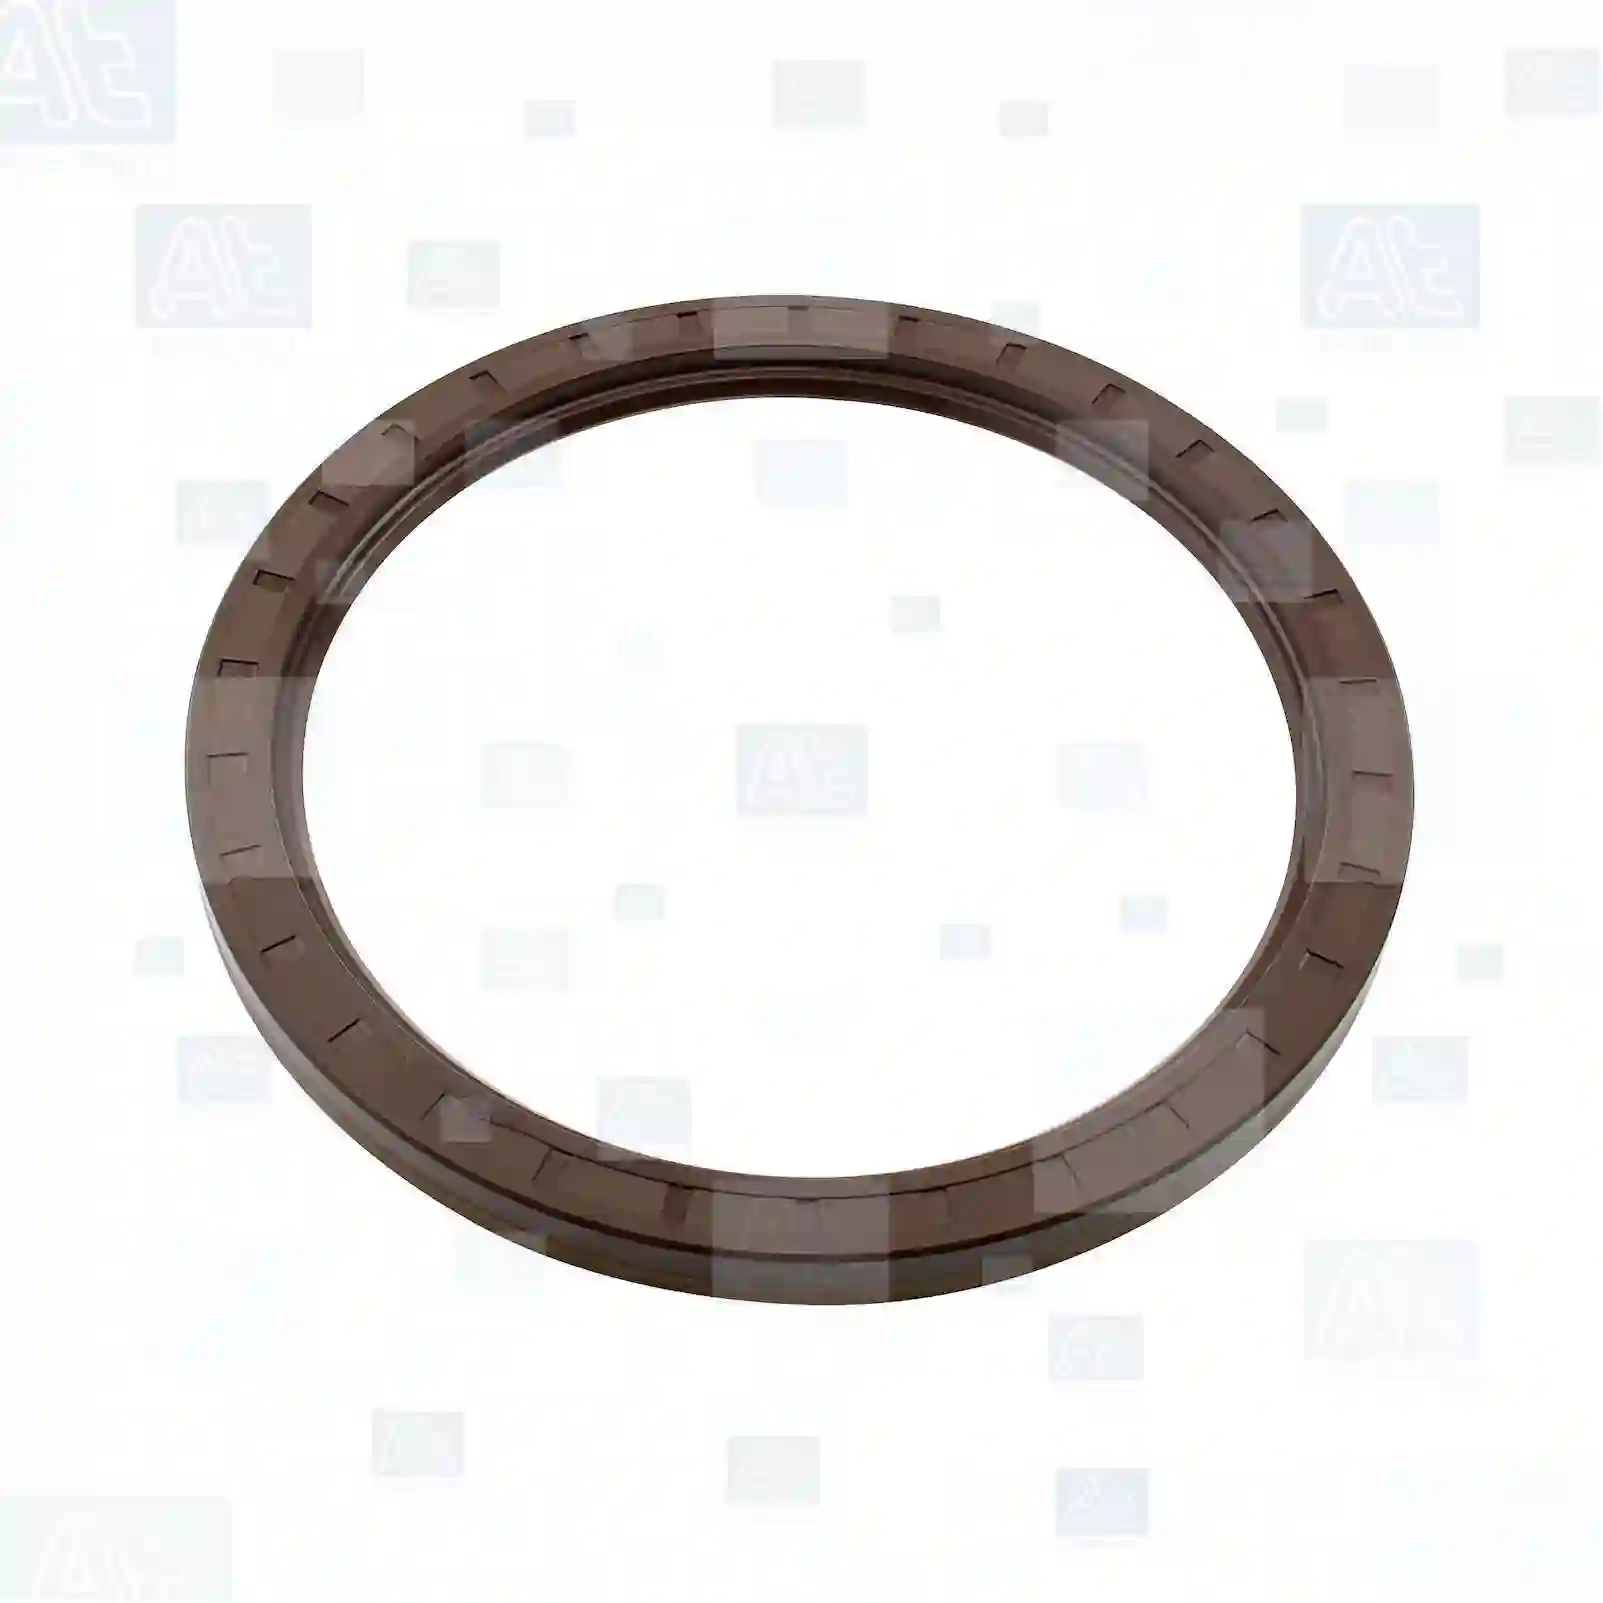 Oil seal, 77726129, 06562790033, 06562890053, 06562890055, 06562890063, 06562890065, 06562890066, 06562890145, 06562890247, 06562890330, 06562890331, 06562890333, 06562890334, 81965010860, 81965010862, 81965030153, 81965030154, 0119970146, 0119971246, 0119973146, 0119973846, 0119974346, 0119975247, 0139970447, 0139975947, 0139976547, 0139979347, 0139979447, ZG02680-0008 ||  77726129 At Spare Part | Engine, Accelerator Pedal, Camshaft, Connecting Rod, Crankcase, Crankshaft, Cylinder Head, Engine Suspension Mountings, Exhaust Manifold, Exhaust Gas Recirculation, Filter Kits, Flywheel Housing, General Overhaul Kits, Engine, Intake Manifold, Oil Cleaner, Oil Cooler, Oil Filter, Oil Pump, Oil Sump, Piston & Liner, Sensor & Switch, Timing Case, Turbocharger, Cooling System, Belt Tensioner, Coolant Filter, Coolant Pipe, Corrosion Prevention Agent, Drive, Expansion Tank, Fan, Intercooler, Monitors & Gauges, Radiator, Thermostat, V-Belt / Timing belt, Water Pump, Fuel System, Electronical Injector Unit, Feed Pump, Fuel Filter, cpl., Fuel Gauge Sender,  Fuel Line, Fuel Pump, Fuel Tank, Injection Line Kit, Injection Pump, Exhaust System, Clutch & Pedal, Gearbox, Propeller Shaft, Axles, Brake System, Hubs & Wheels, Suspension, Leaf Spring, Universal Parts / Accessories, Steering, Electrical System, Cabin Oil seal, 77726129, 06562790033, 06562890053, 06562890055, 06562890063, 06562890065, 06562890066, 06562890145, 06562890247, 06562890330, 06562890331, 06562890333, 06562890334, 81965010860, 81965010862, 81965030153, 81965030154, 0119970146, 0119971246, 0119973146, 0119973846, 0119974346, 0119975247, 0139970447, 0139975947, 0139976547, 0139979347, 0139979447, ZG02680-0008 ||  77726129 At Spare Part | Engine, Accelerator Pedal, Camshaft, Connecting Rod, Crankcase, Crankshaft, Cylinder Head, Engine Suspension Mountings, Exhaust Manifold, Exhaust Gas Recirculation, Filter Kits, Flywheel Housing, General Overhaul Kits, Engine, Intake Manifold, Oil Cleaner, Oil Cooler, Oil Filter, Oil Pump, Oil Sump, Piston & Liner, Sensor & Switch, Timing Case, Turbocharger, Cooling System, Belt Tensioner, Coolant Filter, Coolant Pipe, Corrosion Prevention Agent, Drive, Expansion Tank, Fan, Intercooler, Monitors & Gauges, Radiator, Thermostat, V-Belt / Timing belt, Water Pump, Fuel System, Electronical Injector Unit, Feed Pump, Fuel Filter, cpl., Fuel Gauge Sender,  Fuel Line, Fuel Pump, Fuel Tank, Injection Line Kit, Injection Pump, Exhaust System, Clutch & Pedal, Gearbox, Propeller Shaft, Axles, Brake System, Hubs & Wheels, Suspension, Leaf Spring, Universal Parts / Accessories, Steering, Electrical System, Cabin